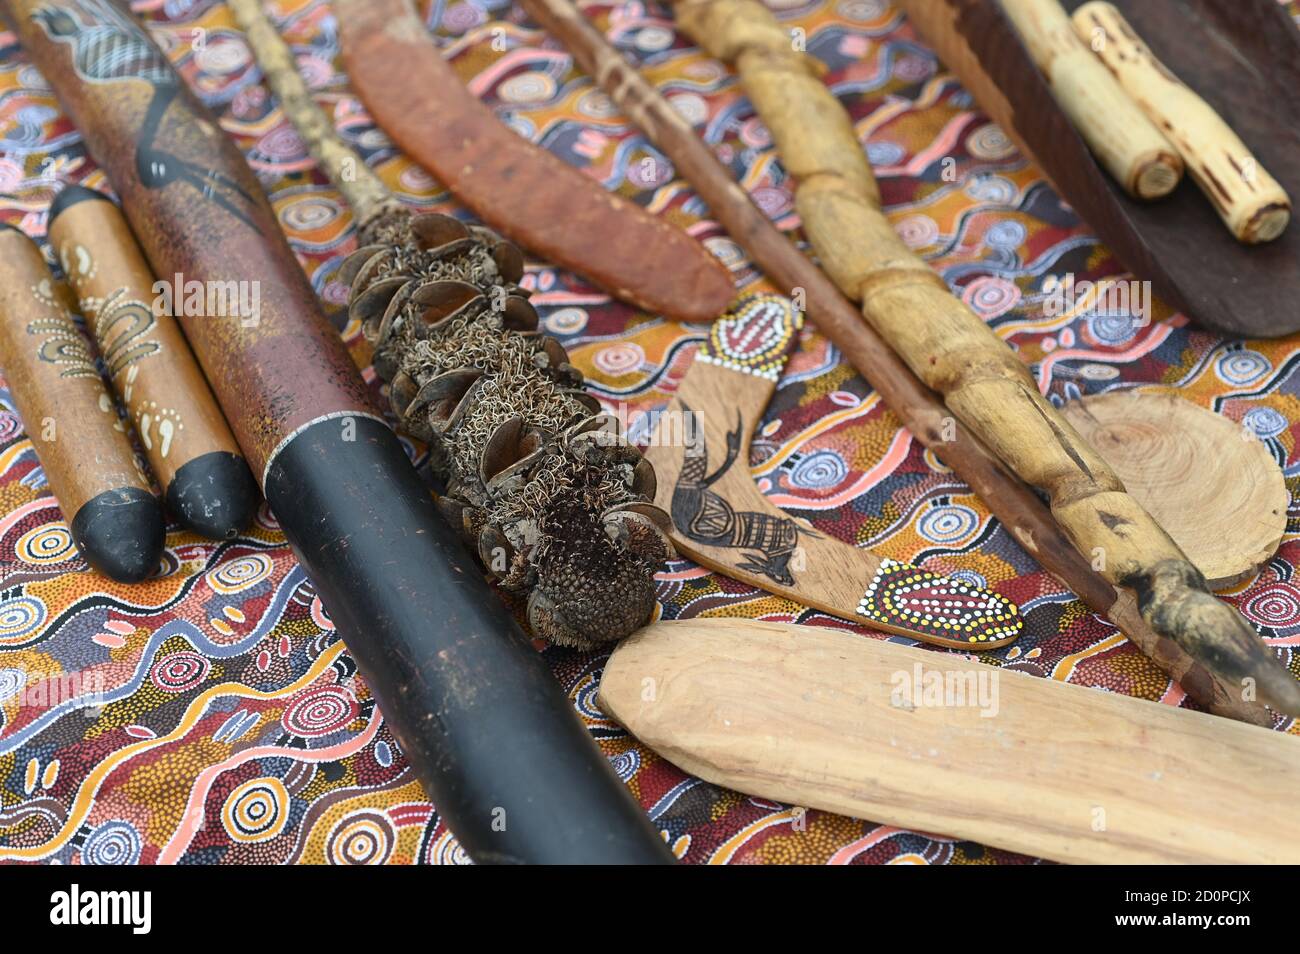 Aboriginal Hunting High Resolution Stock Photography and - Alamy